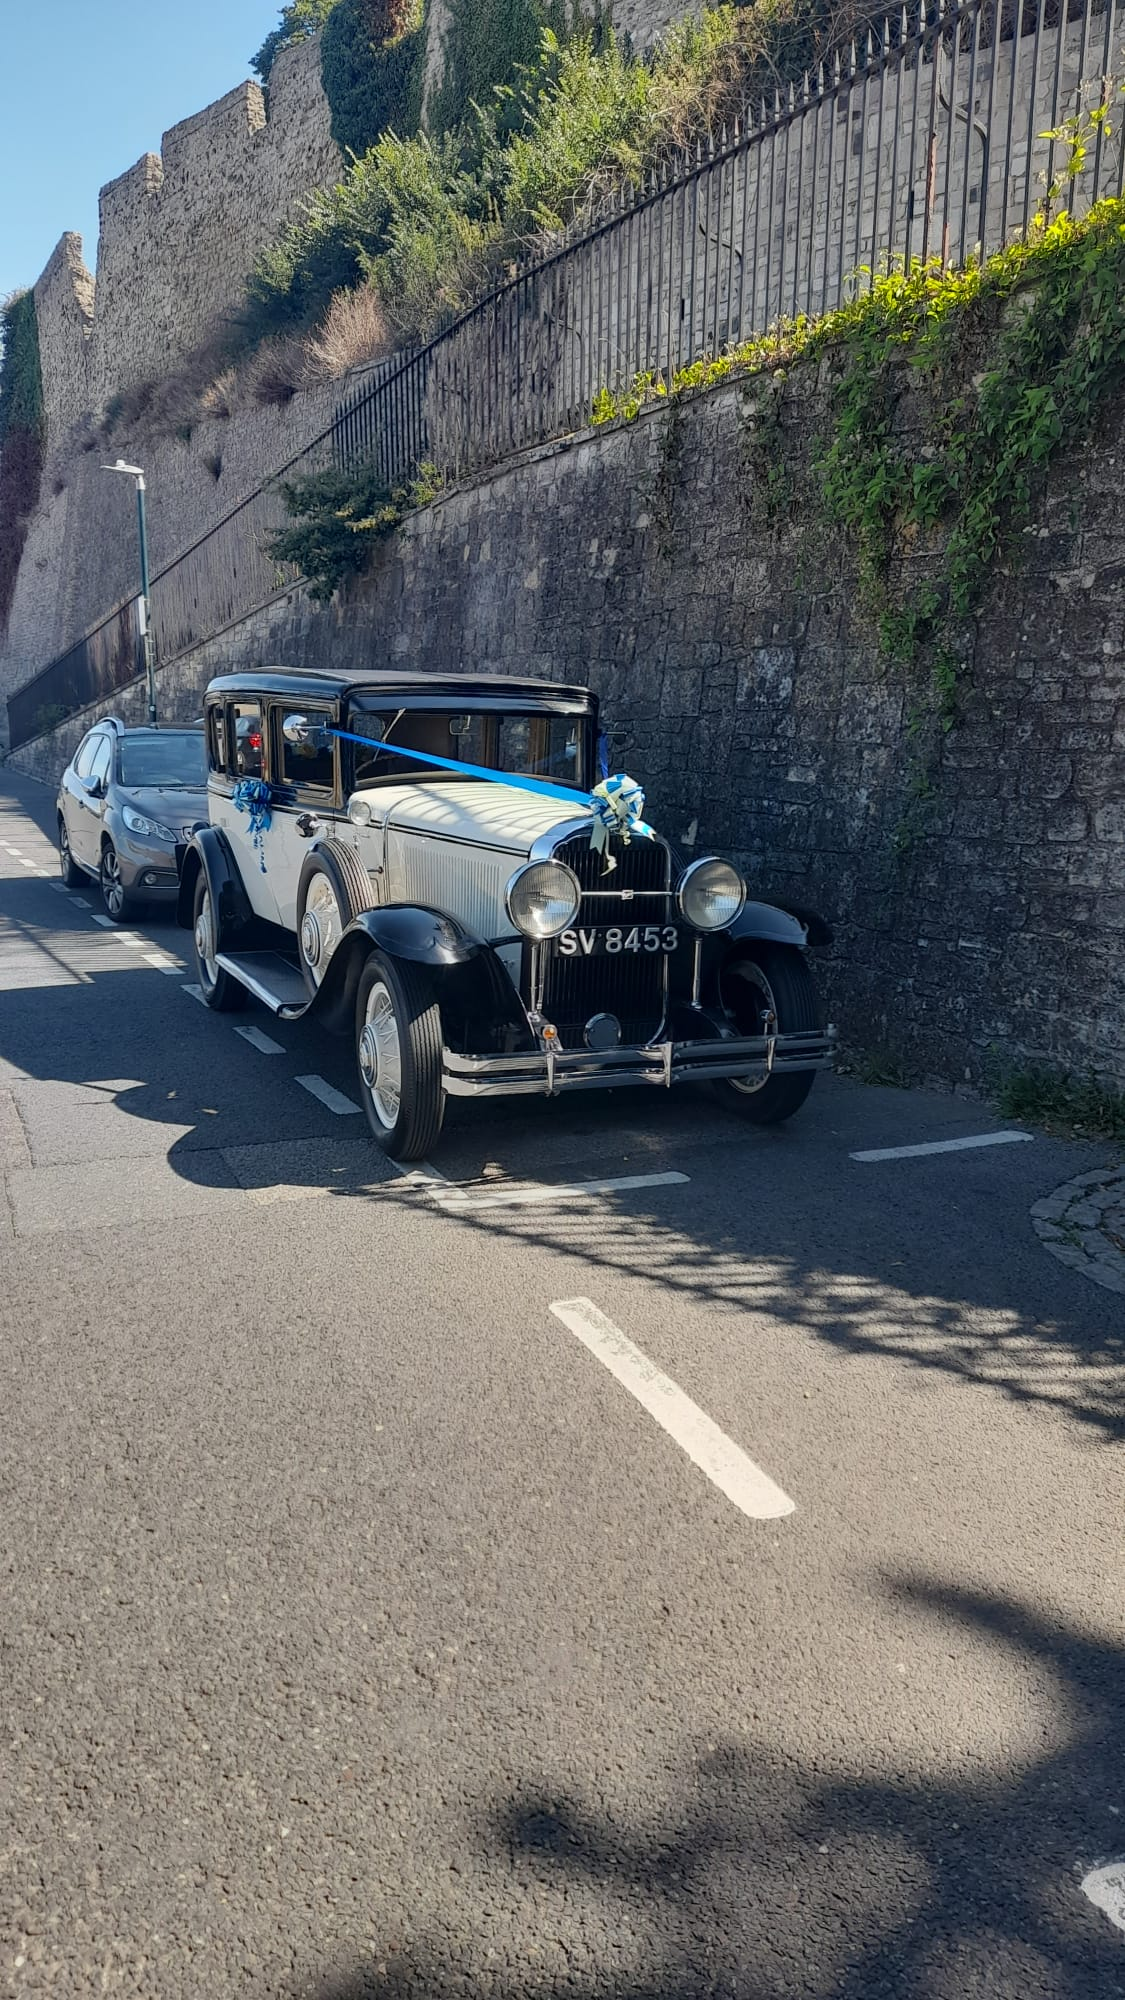 1930 Buick Series 47 Sedan Wedding Car Hire in Rochester Medway Kent